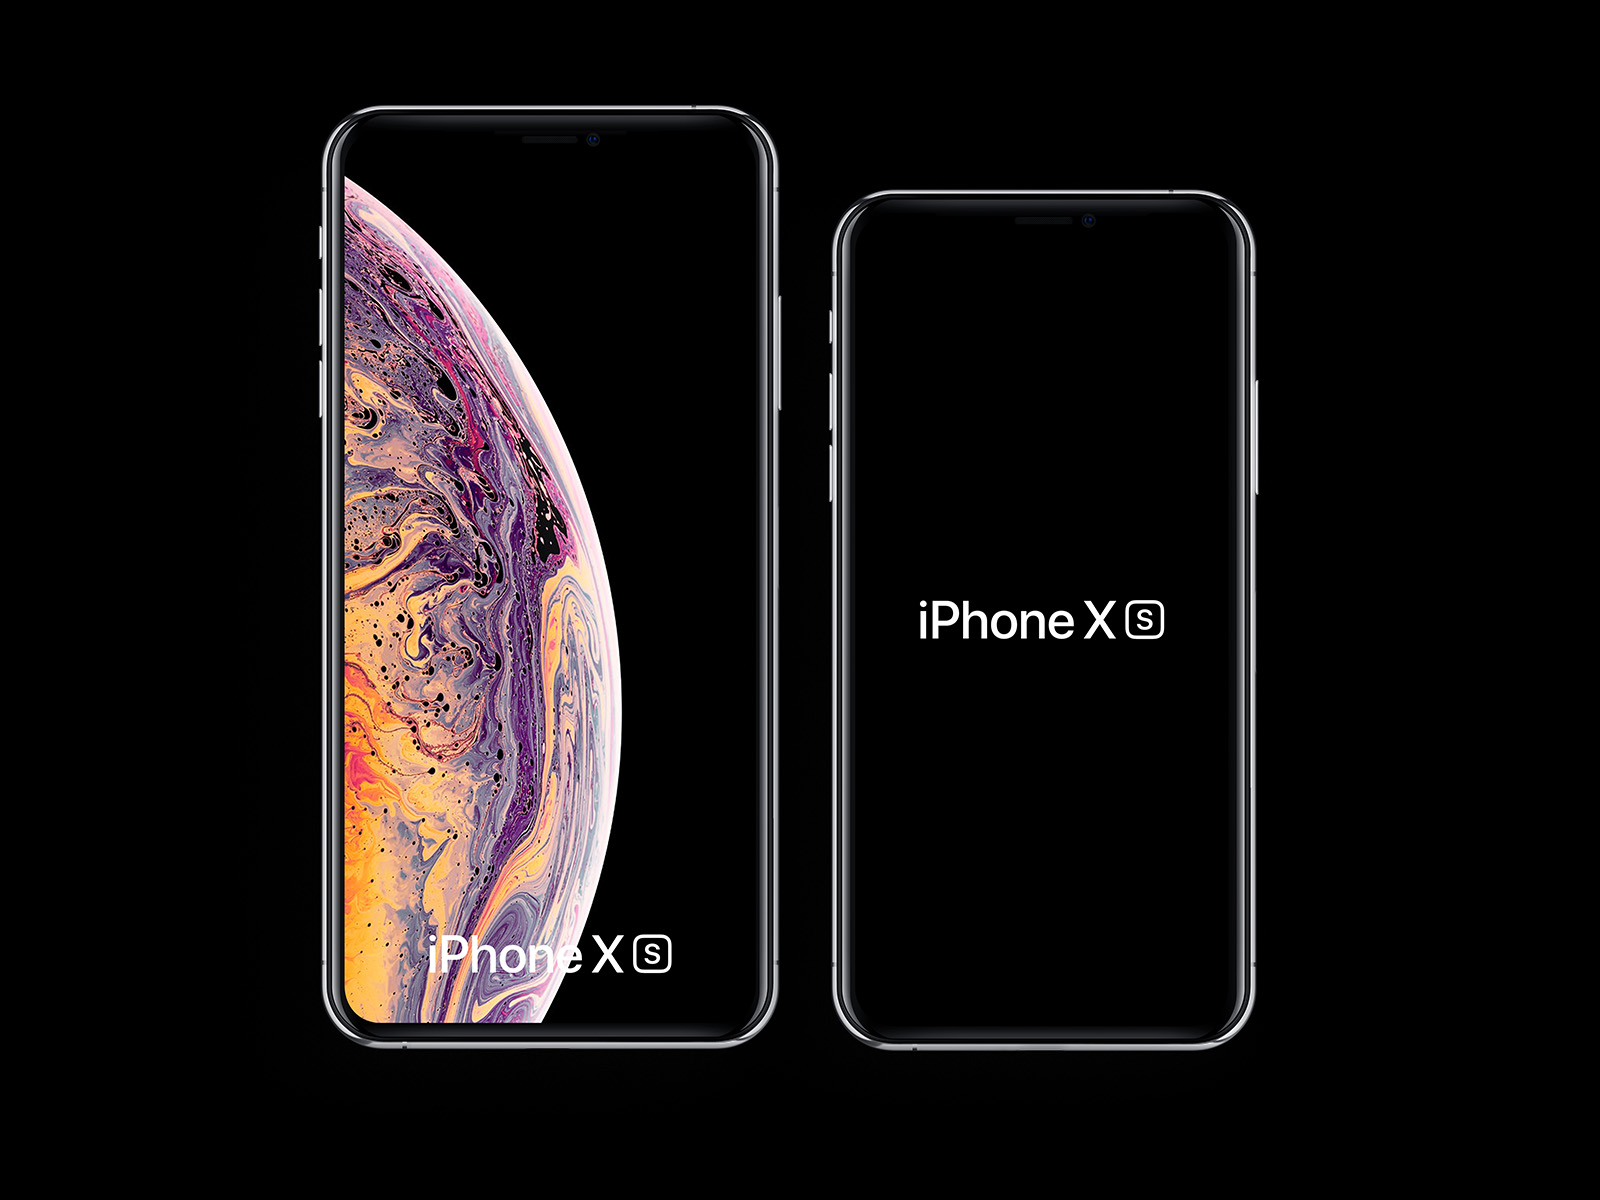 Free iPhone XS and iPhone XS Max Mockups